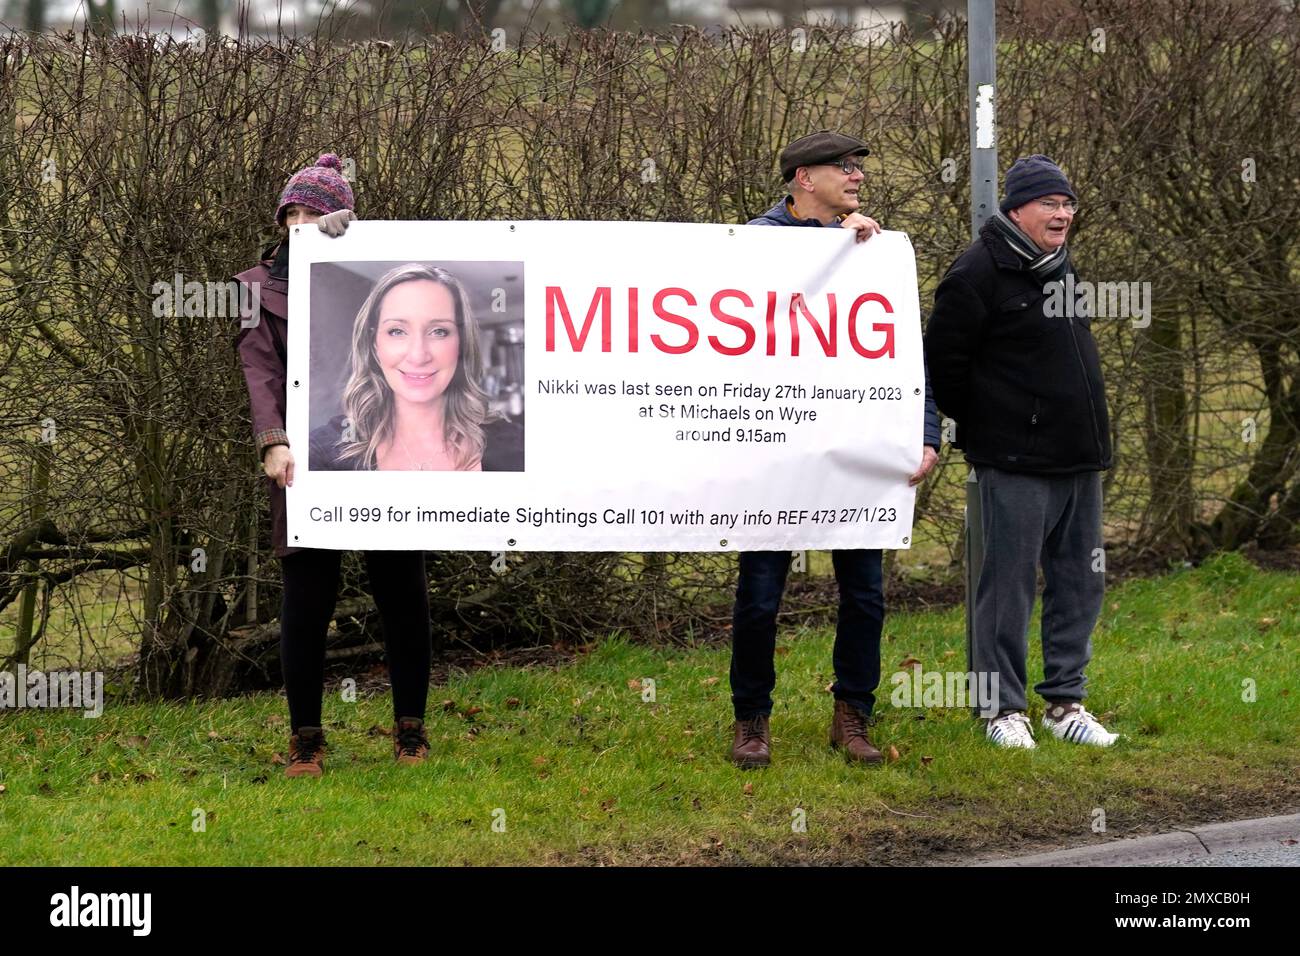 Members of the public line the road into St Michael's on Wyre, Lancashire, with missing posters of Nicola Bulley, 45, as police continue their search for the missing woman who was last seen on the morning of Friday January 27, when she was spotted walking her dog on a footpath by the nearby River Wyre. Picture date: Friday February 3, 2023. Stock Photo